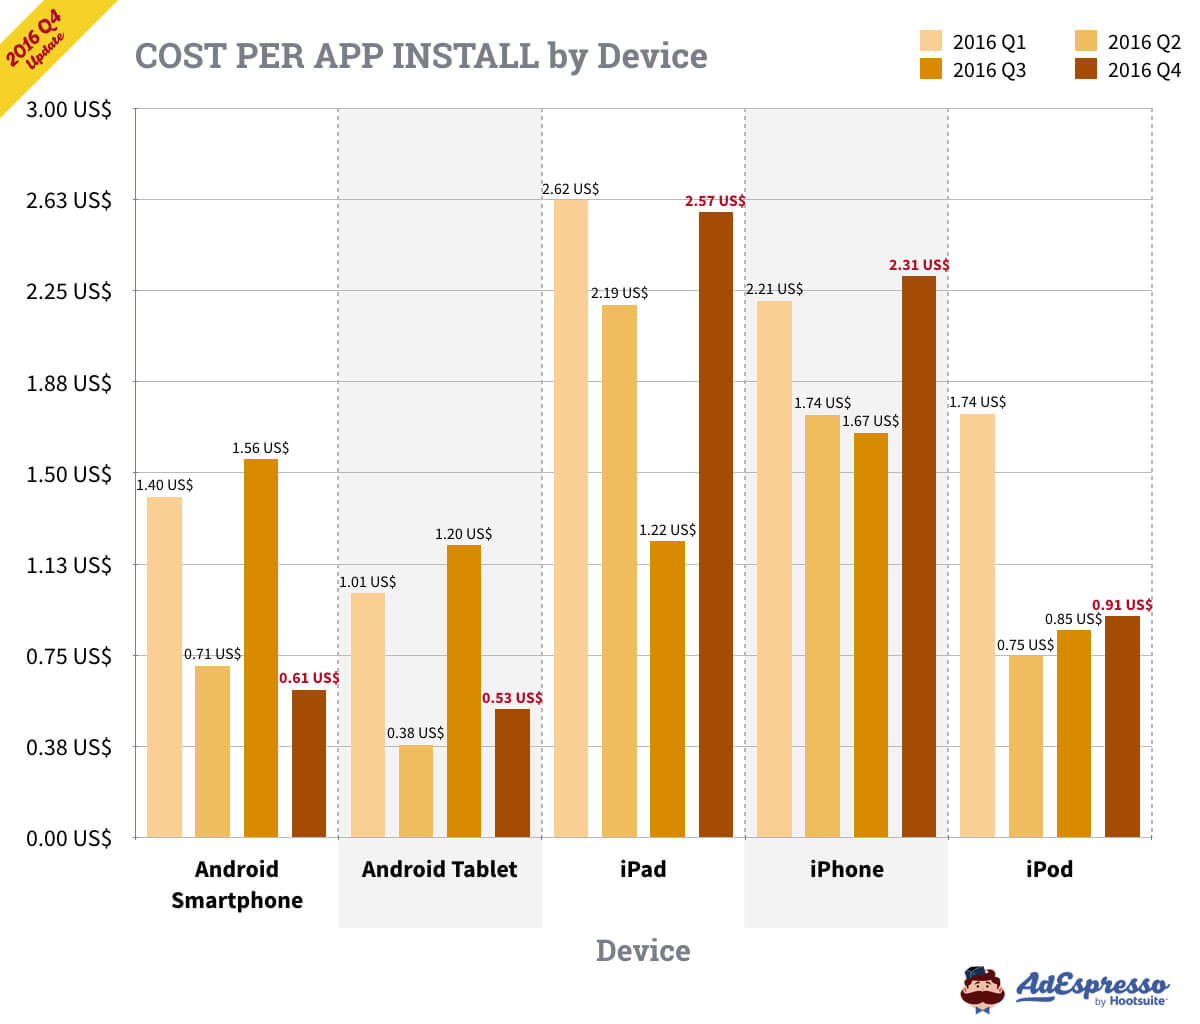 Android tablets have the lowest cost per app install. 